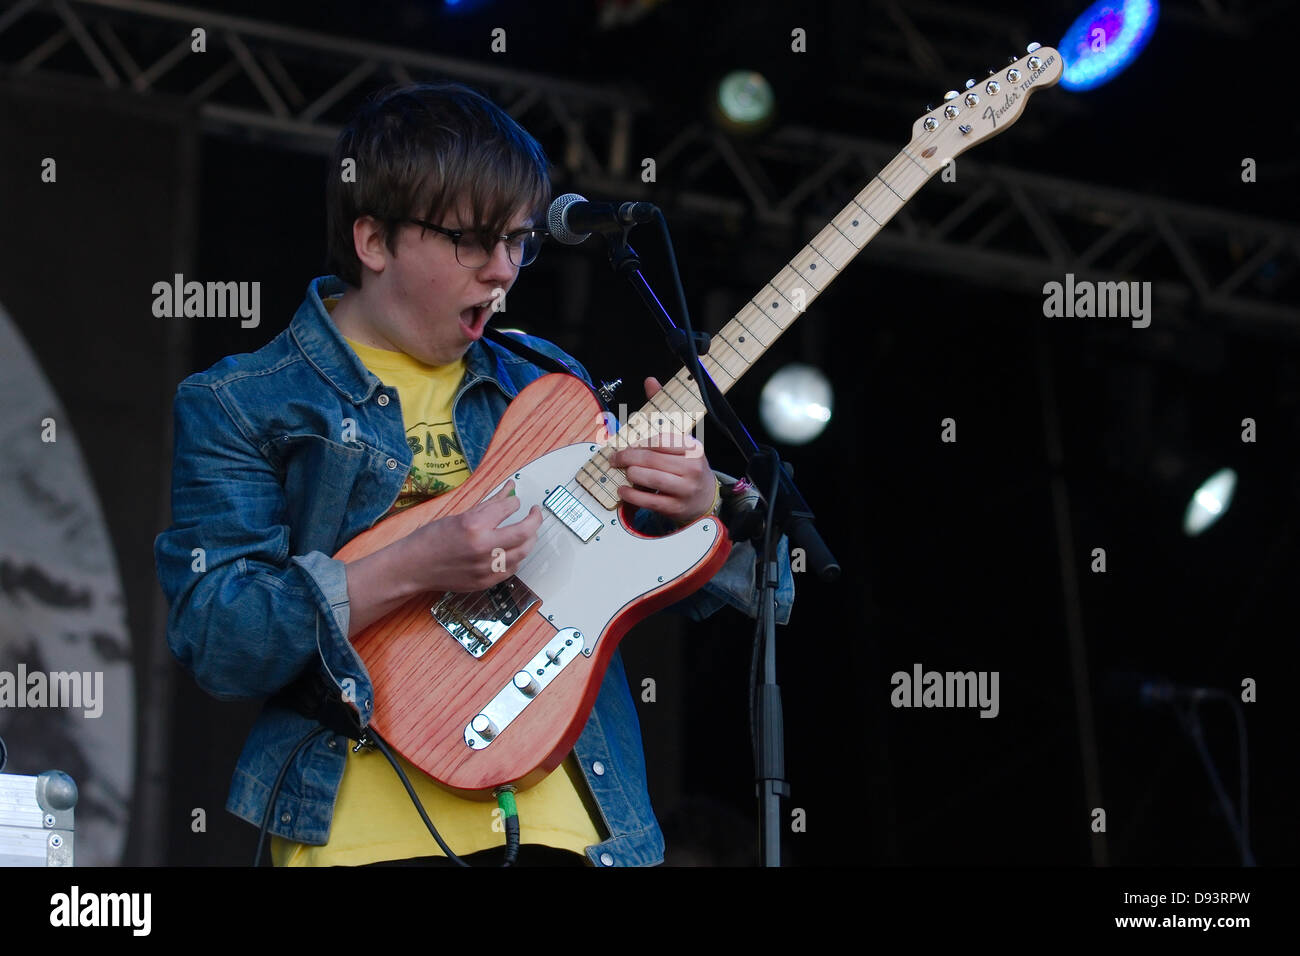 Loch Ness, UK. 9th June, 2013. Fatherson perform at RockNess 2013 - Sunday 9th June 2013 Credit:  Thomas Bisset/Alamy Live News Stock Photo